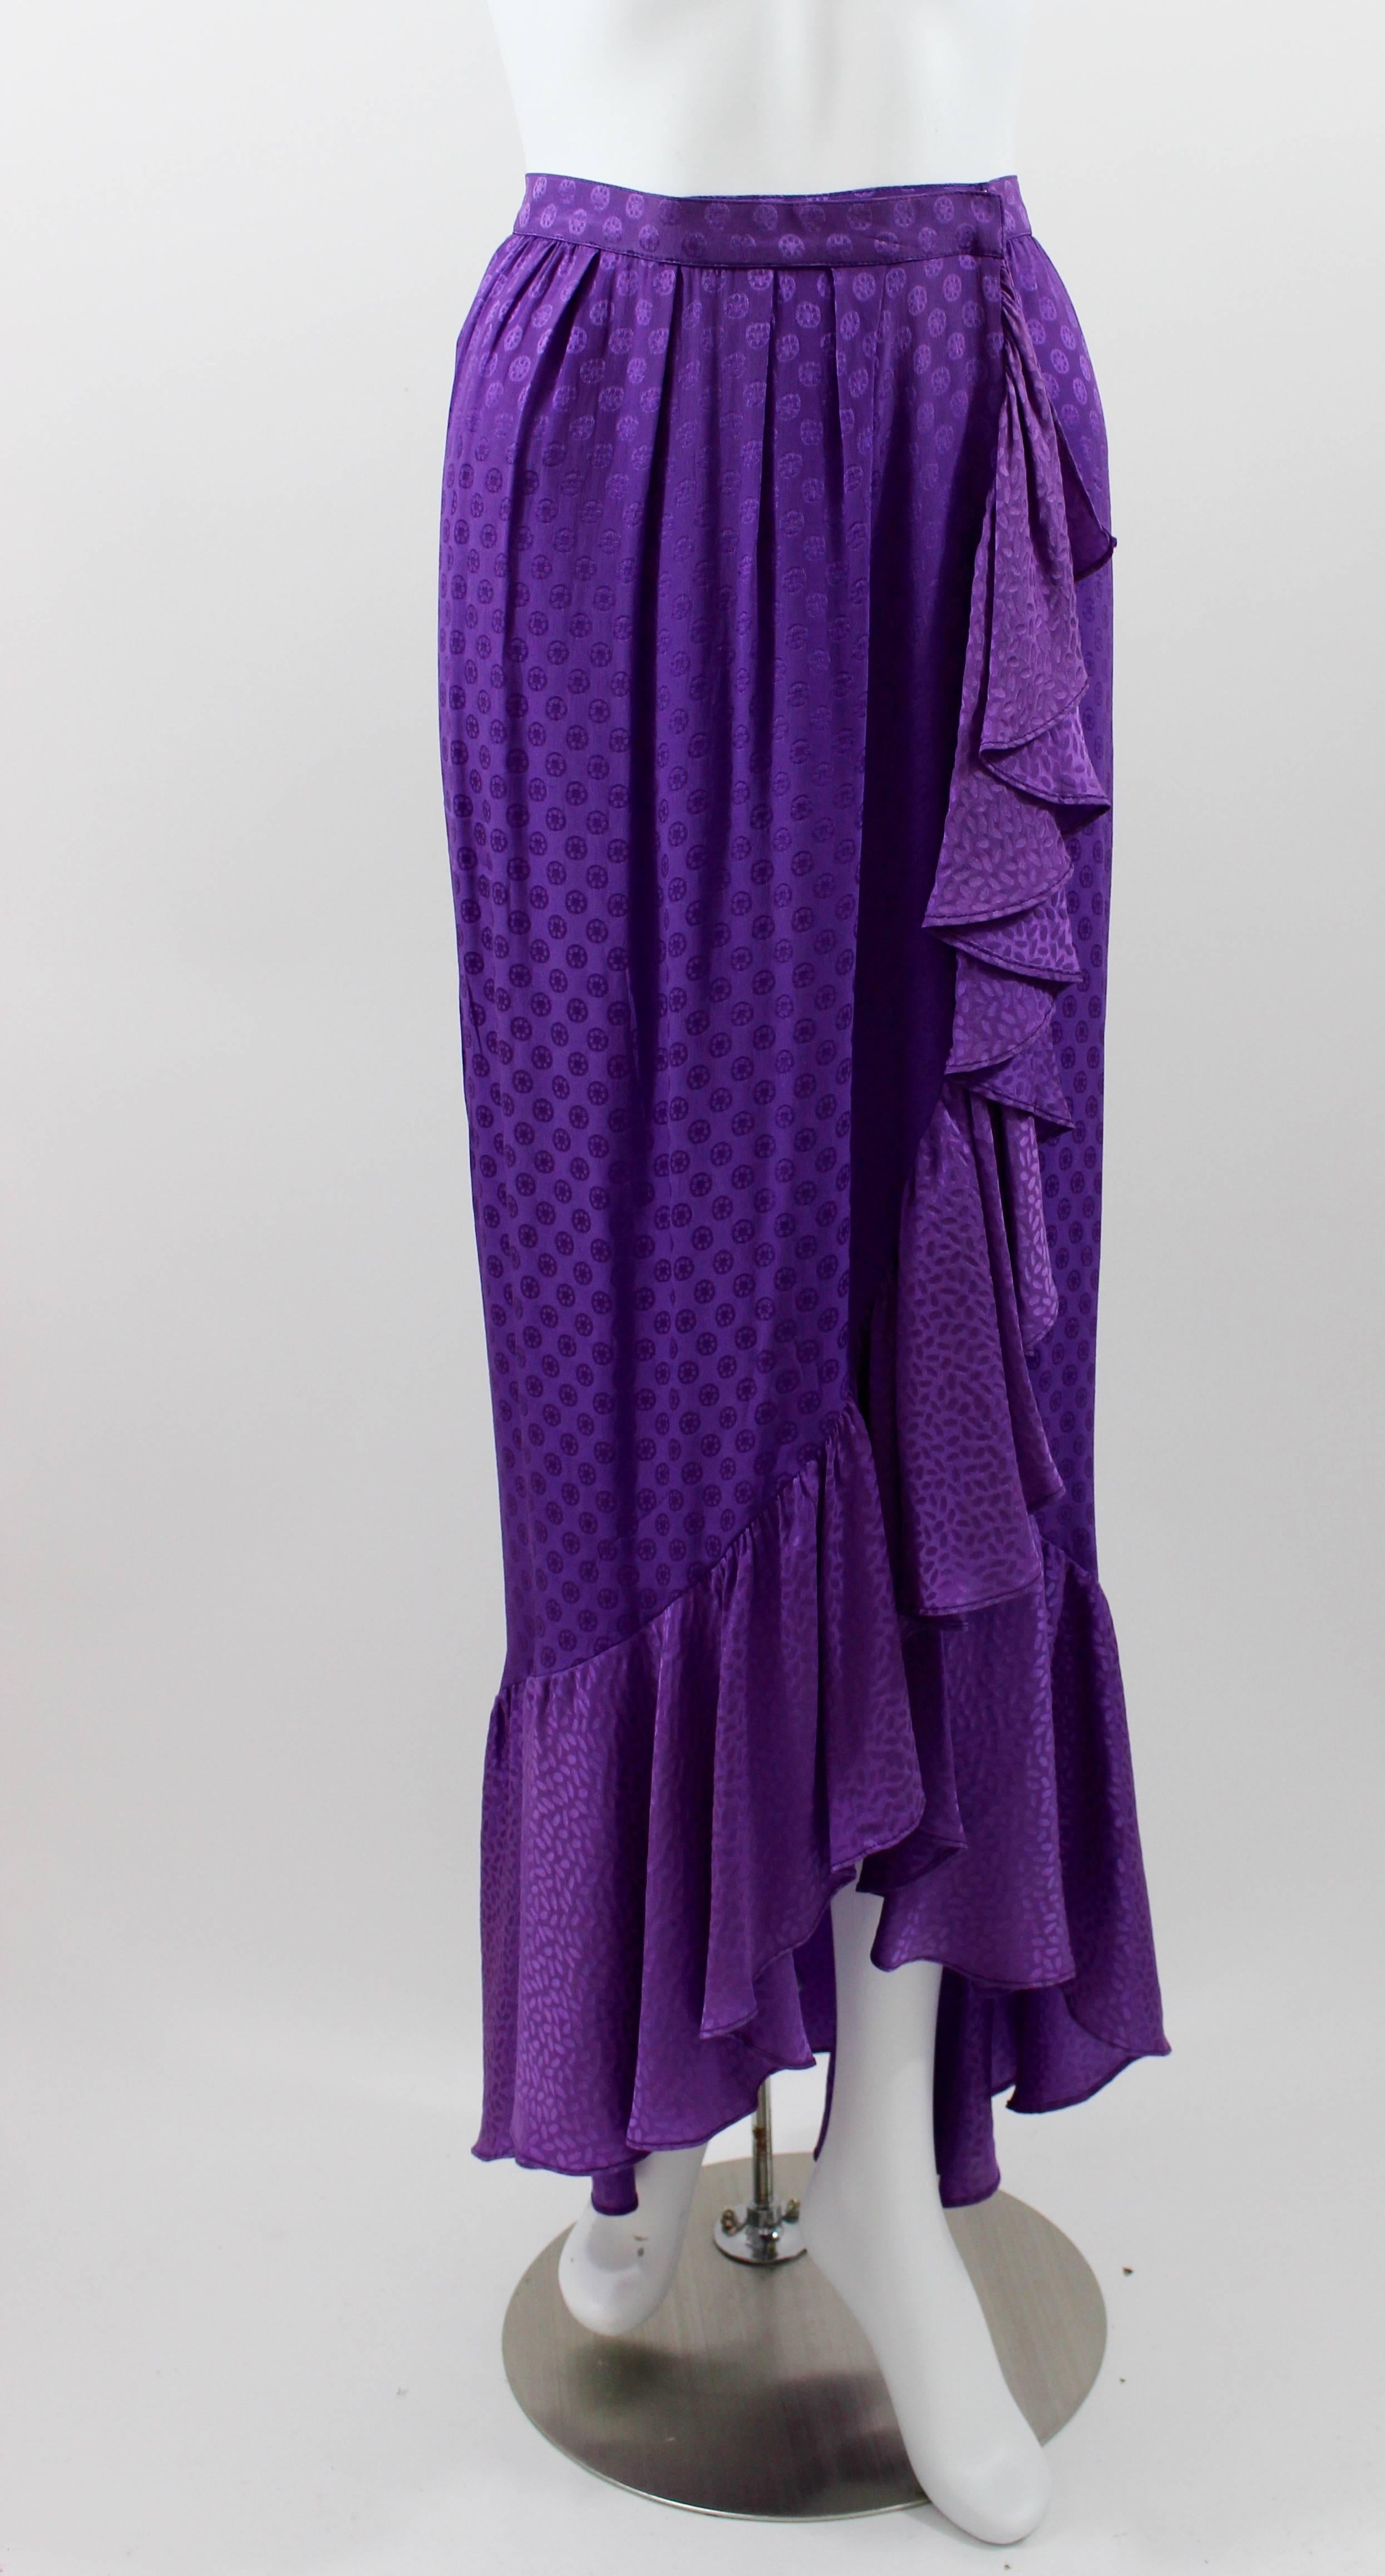 Purple Silk skirt. Ruffle trim.
Wrap style skirt.
Hidden hook closures in the waistband.
Discoloration at the bottom of the ruffle, partially hidden in the ruffle pleats, please refer to images 5,7 and 8 for details.

Size estimate: S

